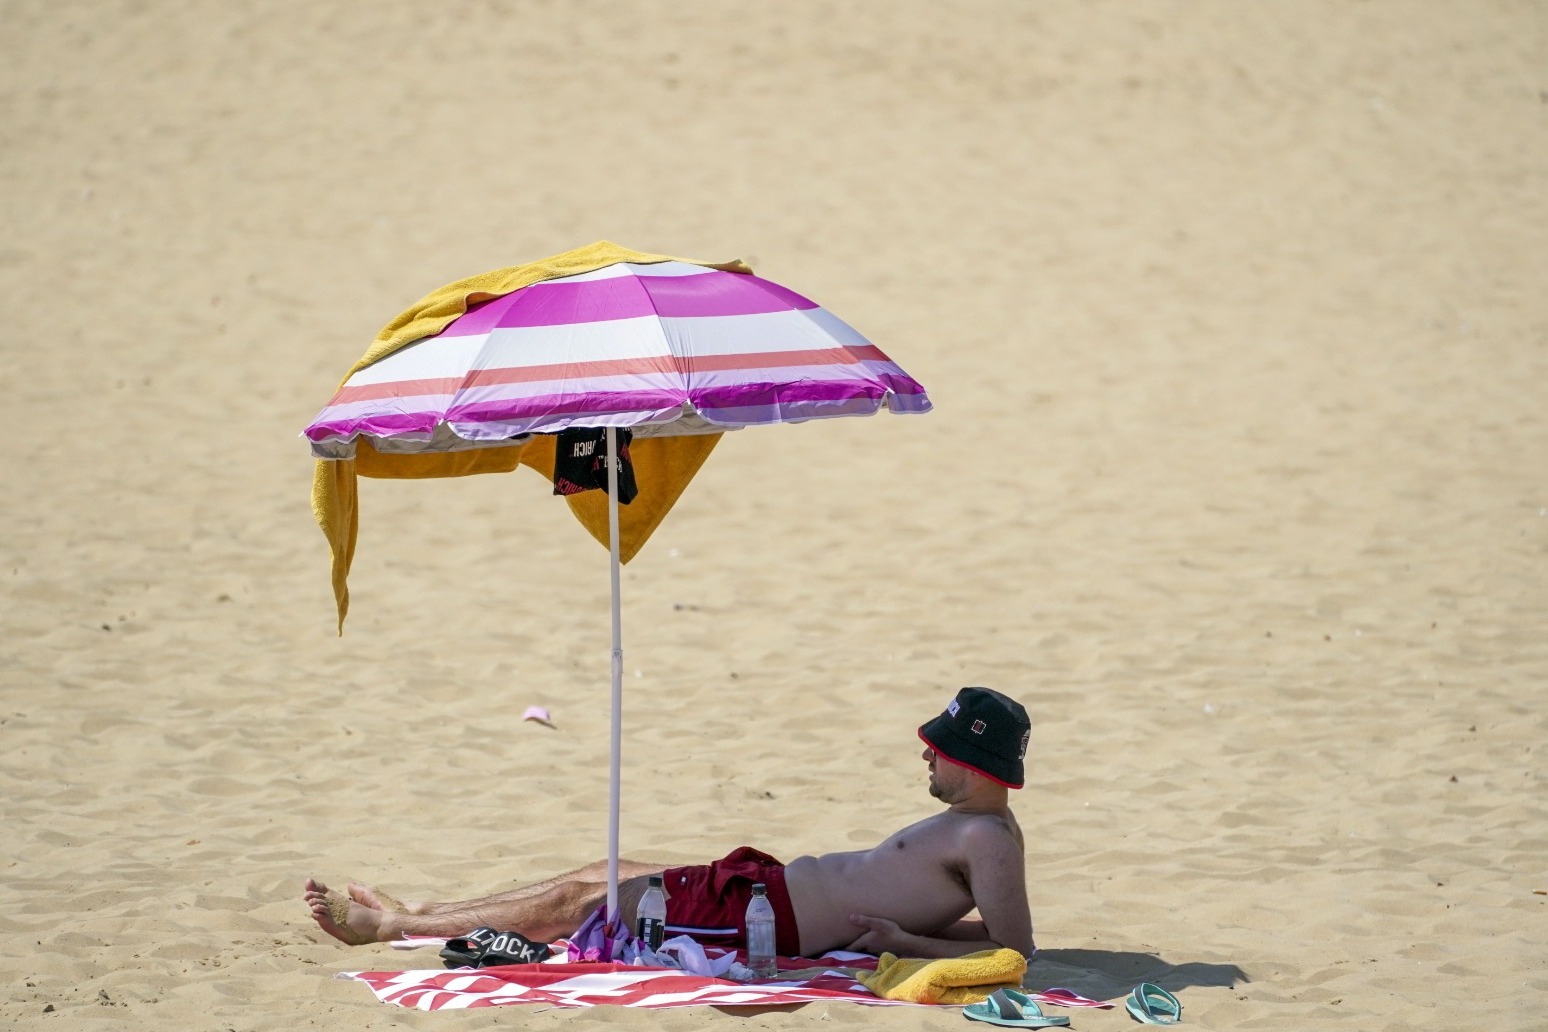 UK sees annual temperatures average more than 10C for first time 